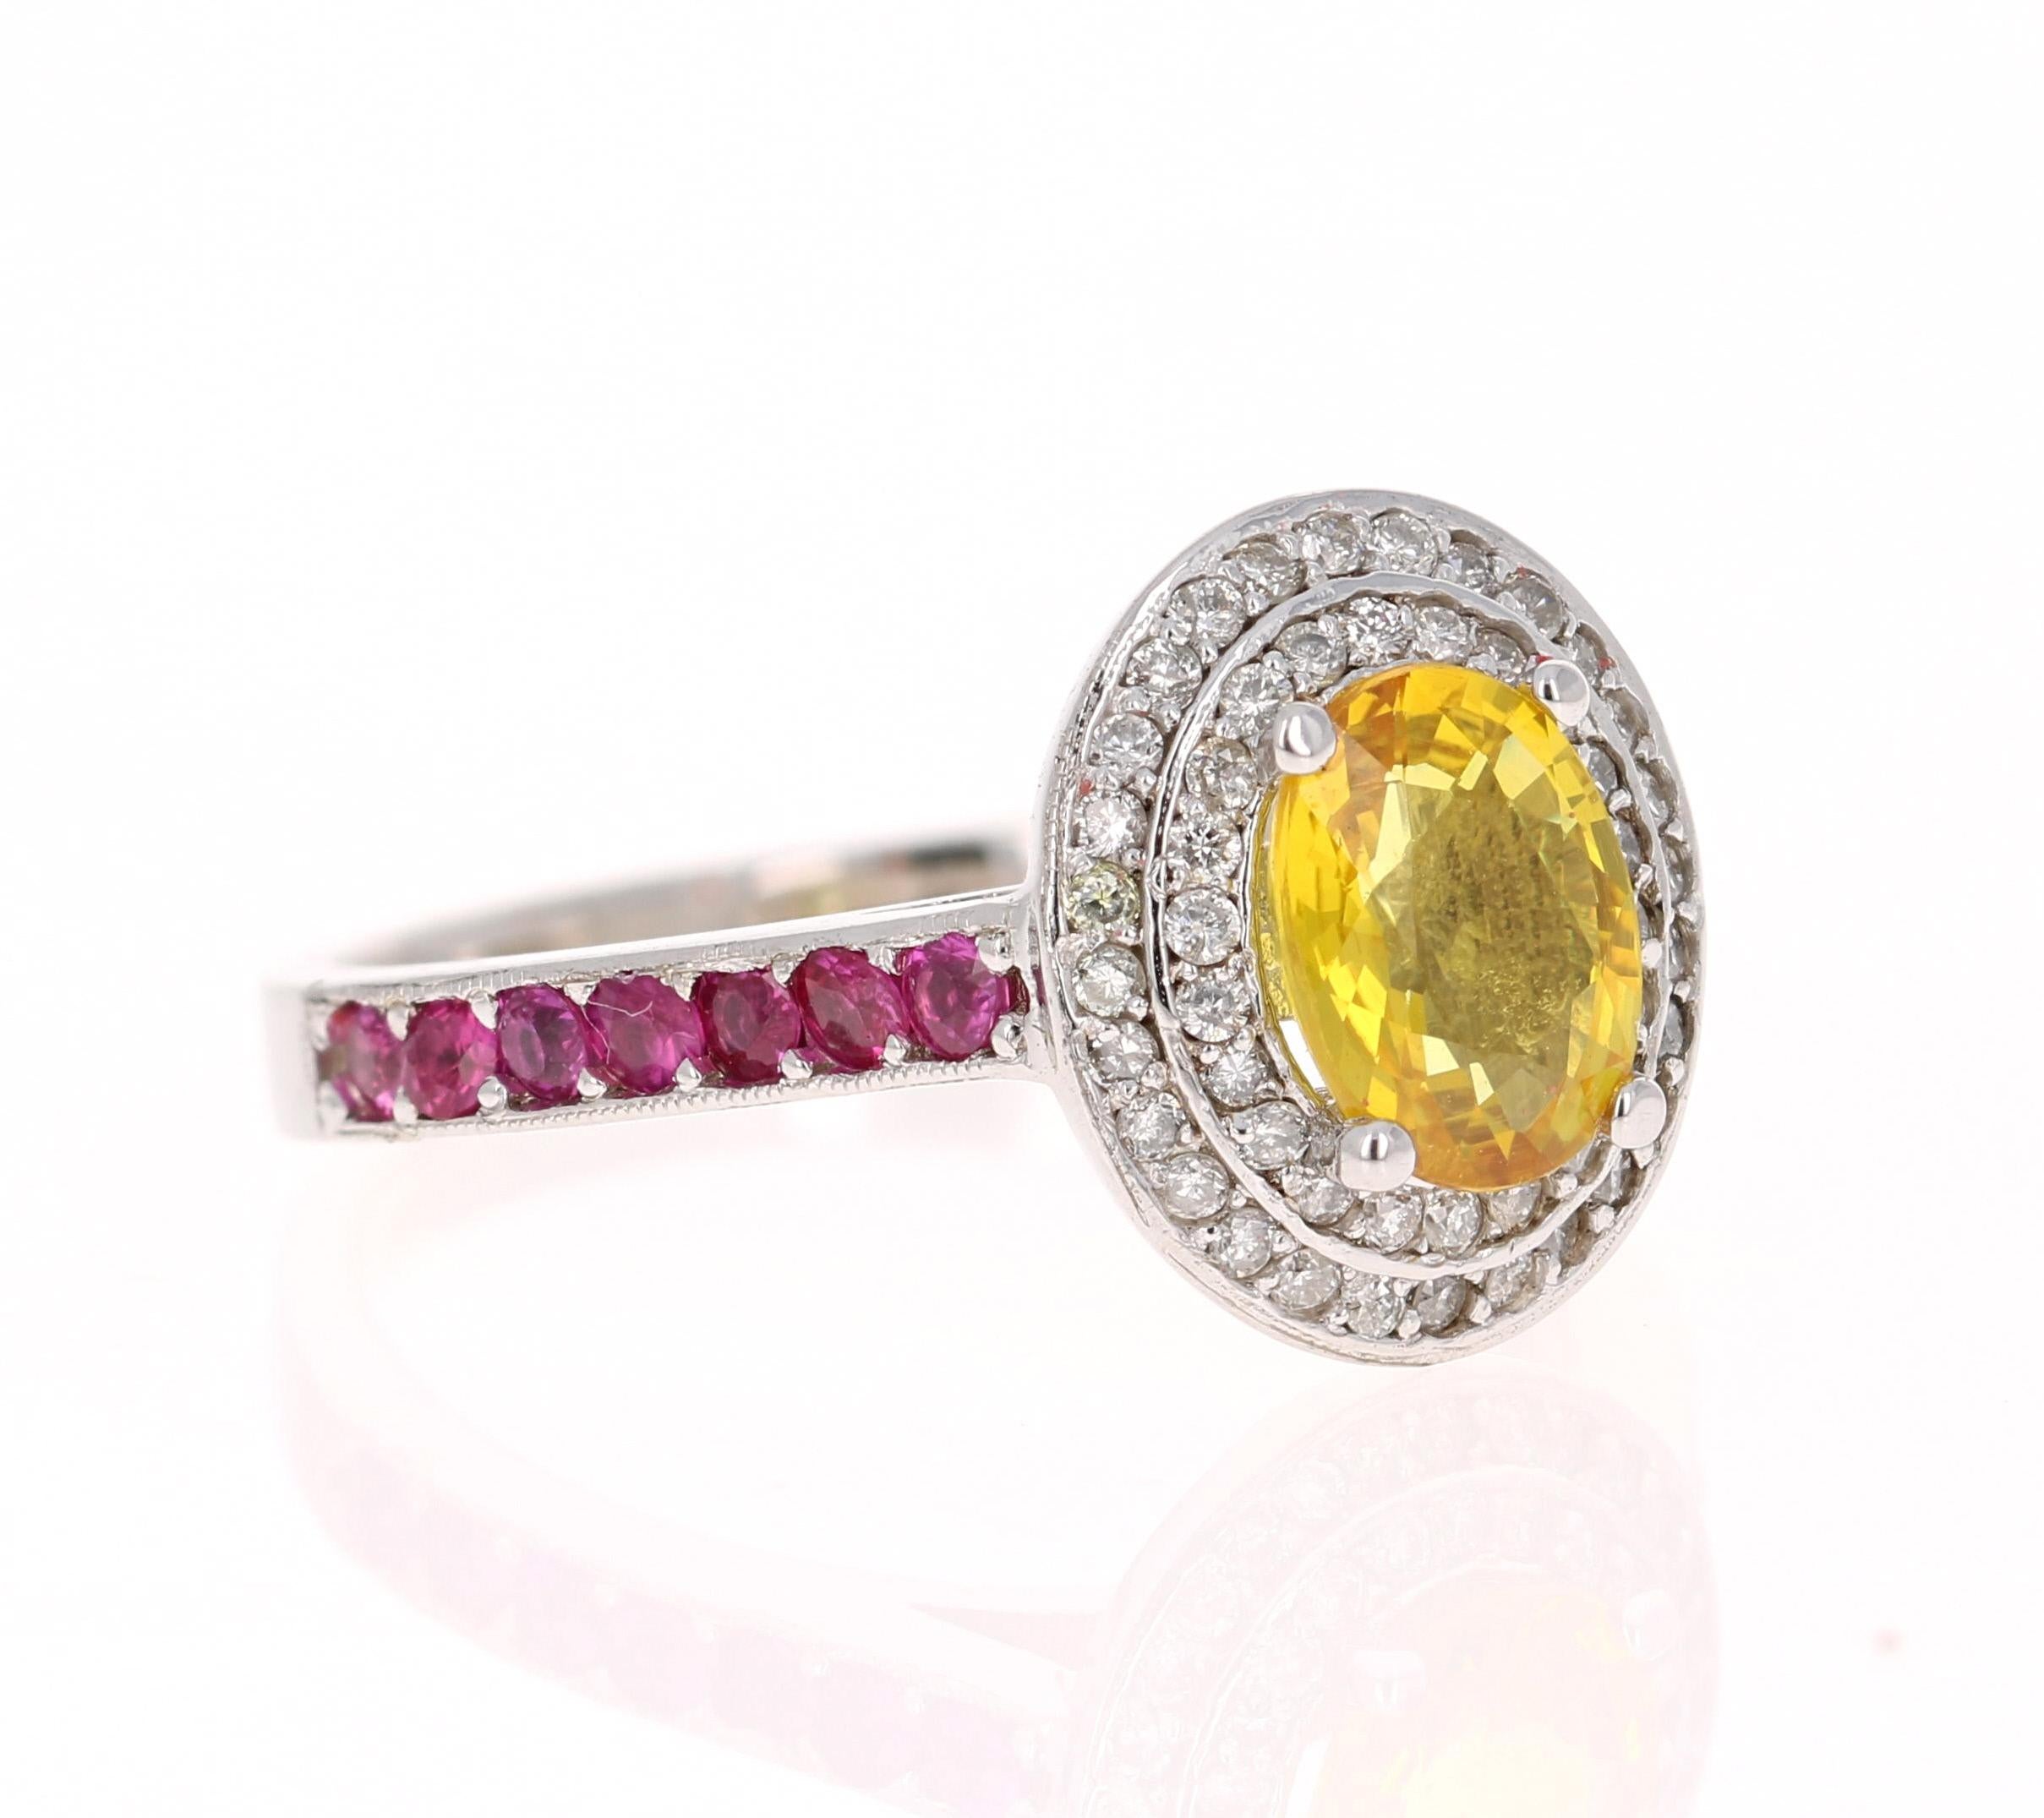 This ring has a 1.16 Carat Oval Cut Natural Yellow Sapphire. 
It has a halo of 54 Round Cut Diamonds that weigh 0.29 carats (Clarity: SI, Color: F) and 14 Pink Sapphires that weigh 0.42 Carats. The total carat weight of the ring is 1.87 Carats. 

It